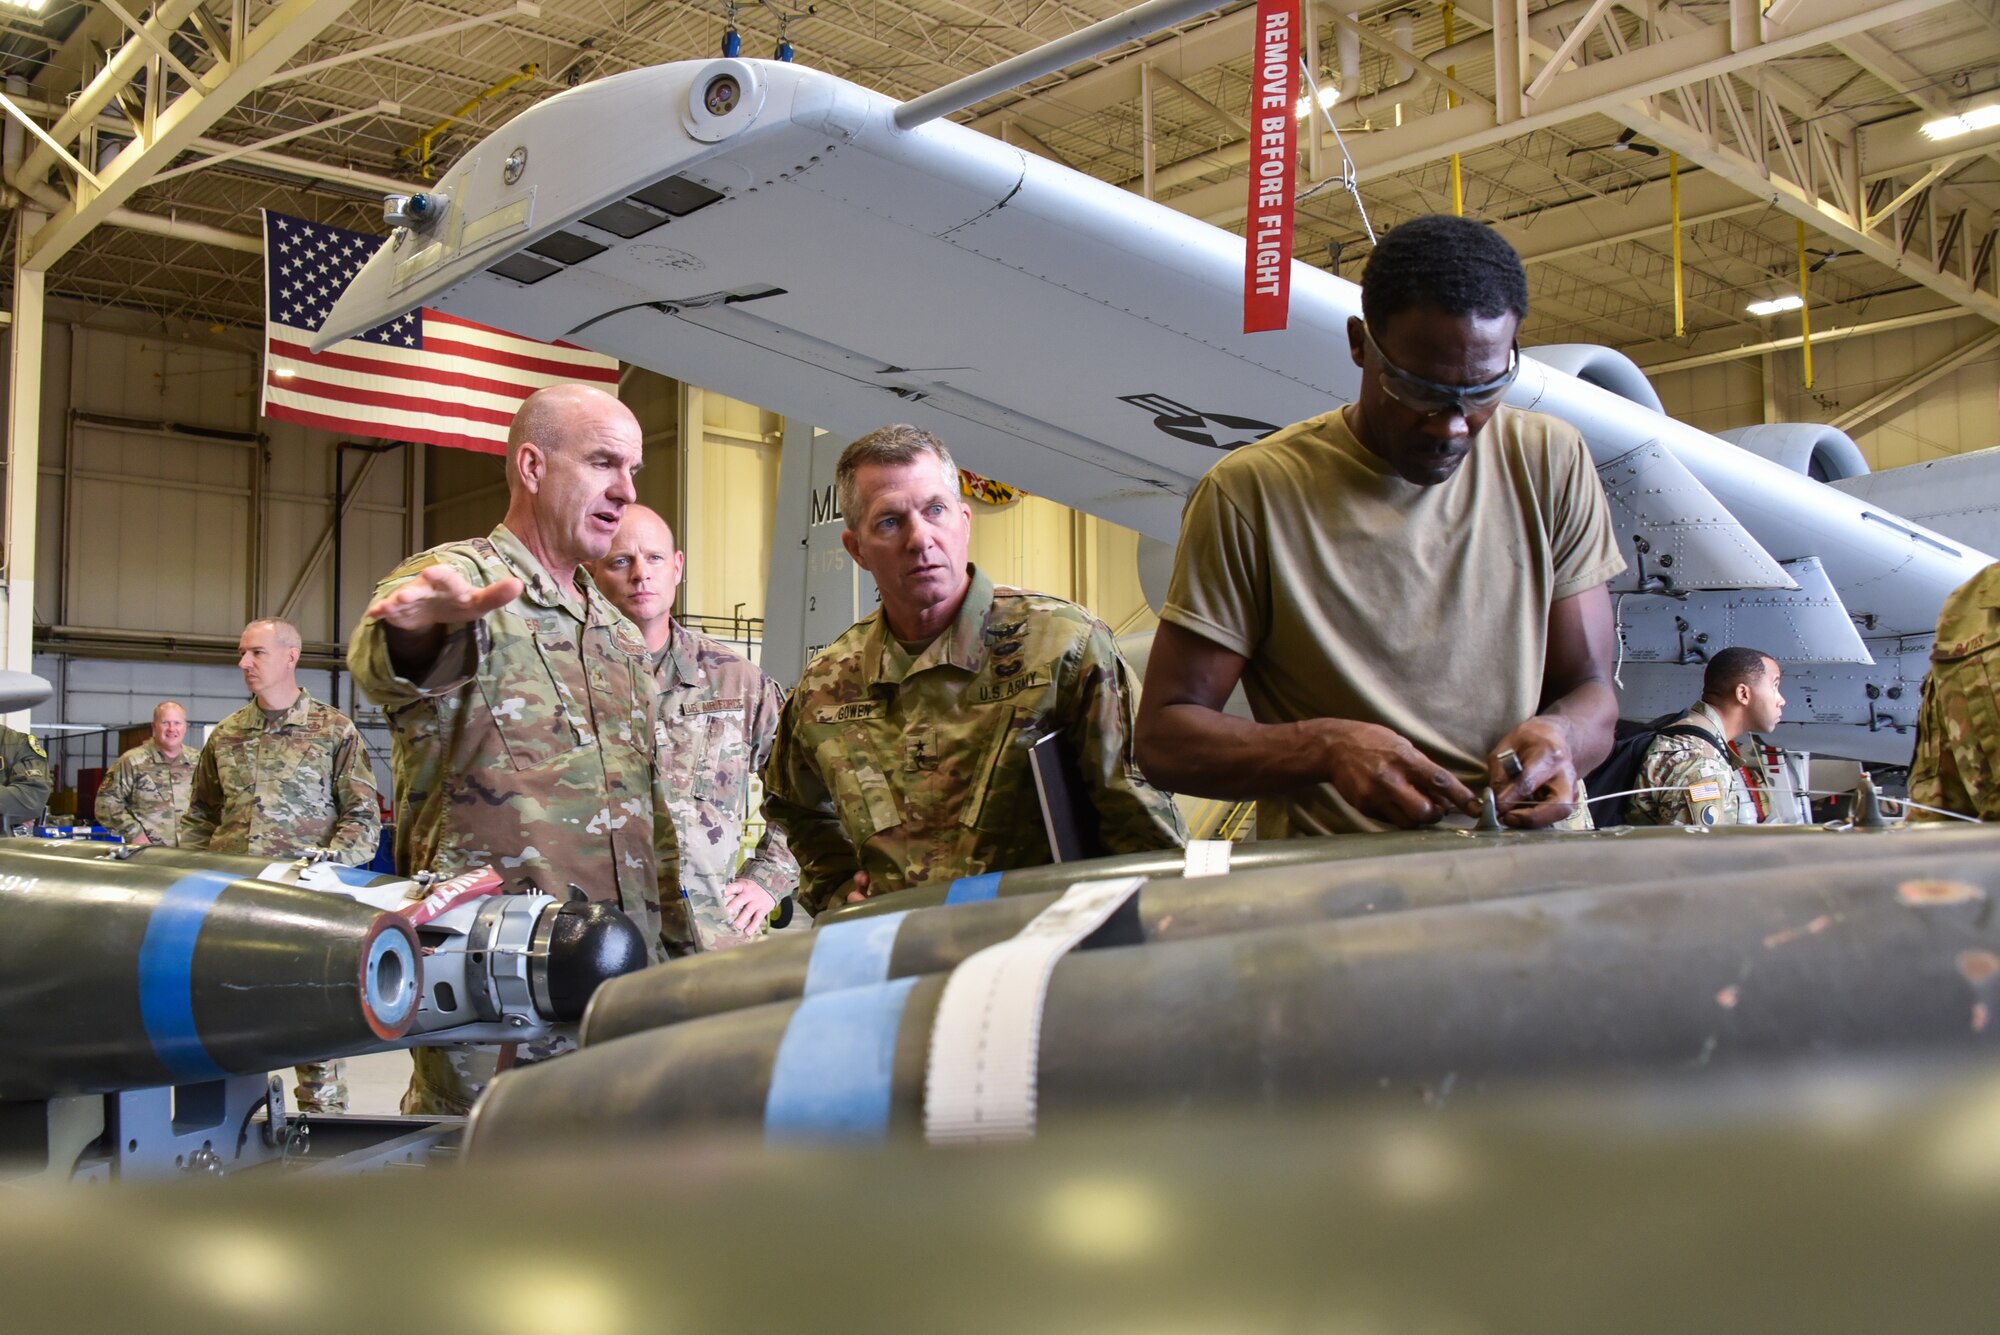 U.S. Air Force Brig. Gen. Edward Jones, Maryland’s assistant adjutant general for Air, gives U.S. Army Maj. Gen. Timothy E. Gowen, adjutant general for Maryland, a tour of an A-10C Thunderbolt II aircraft hangar Oct. 6, 2019 during his initial visit to the Maryland Air National Guard’s 175th Wing in Middle River, Md.